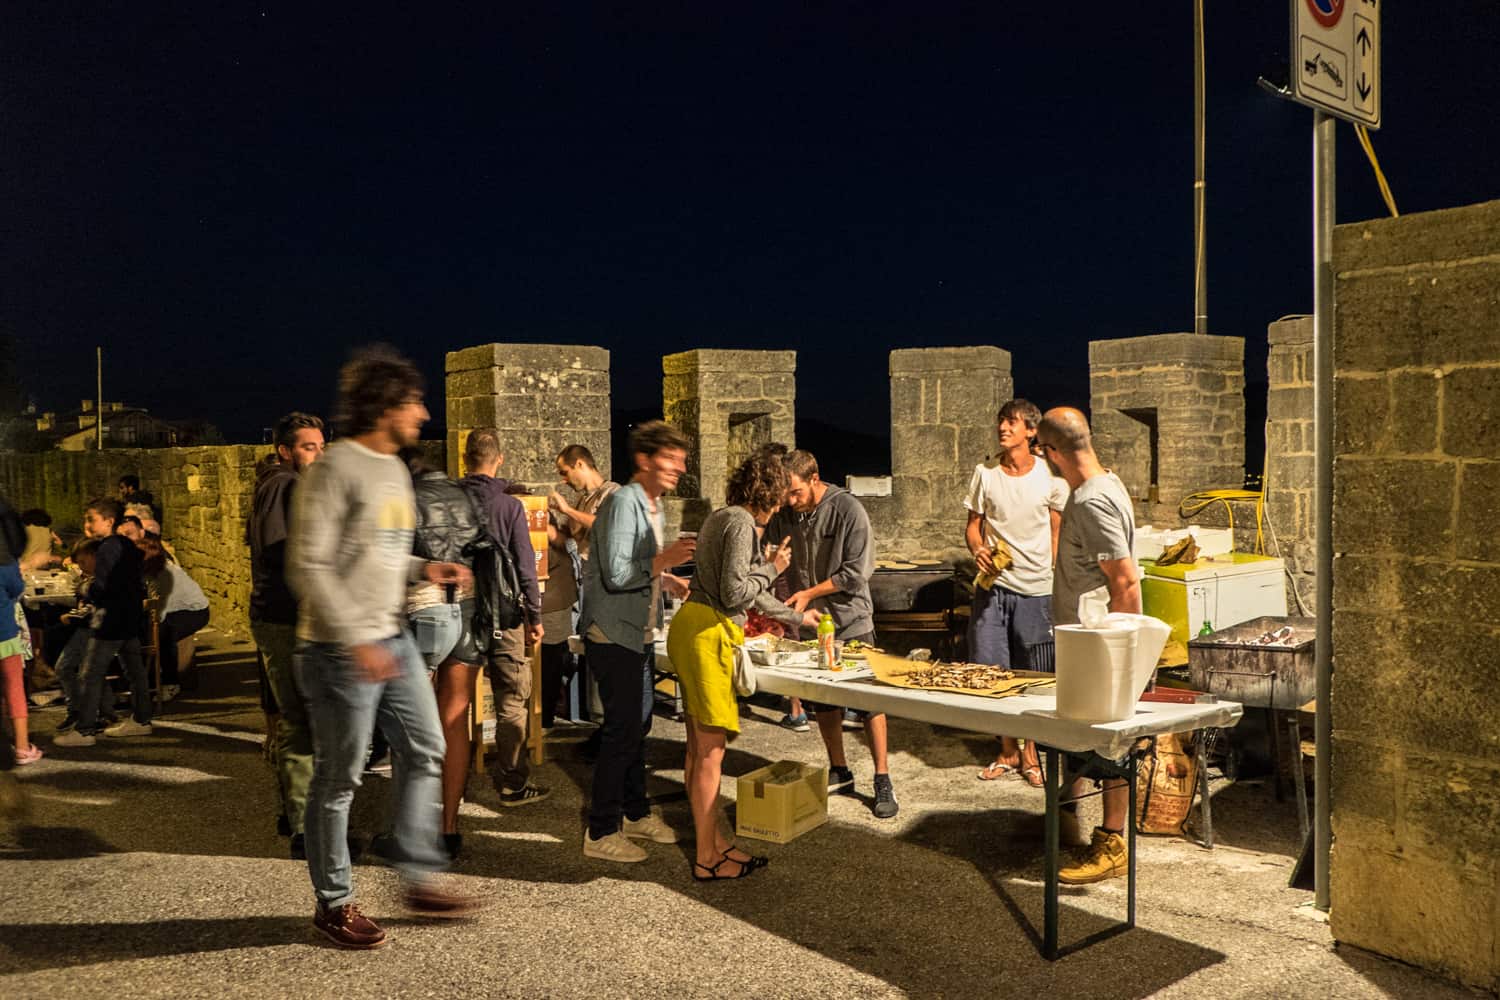 Evening events in San Marino on the old city walls